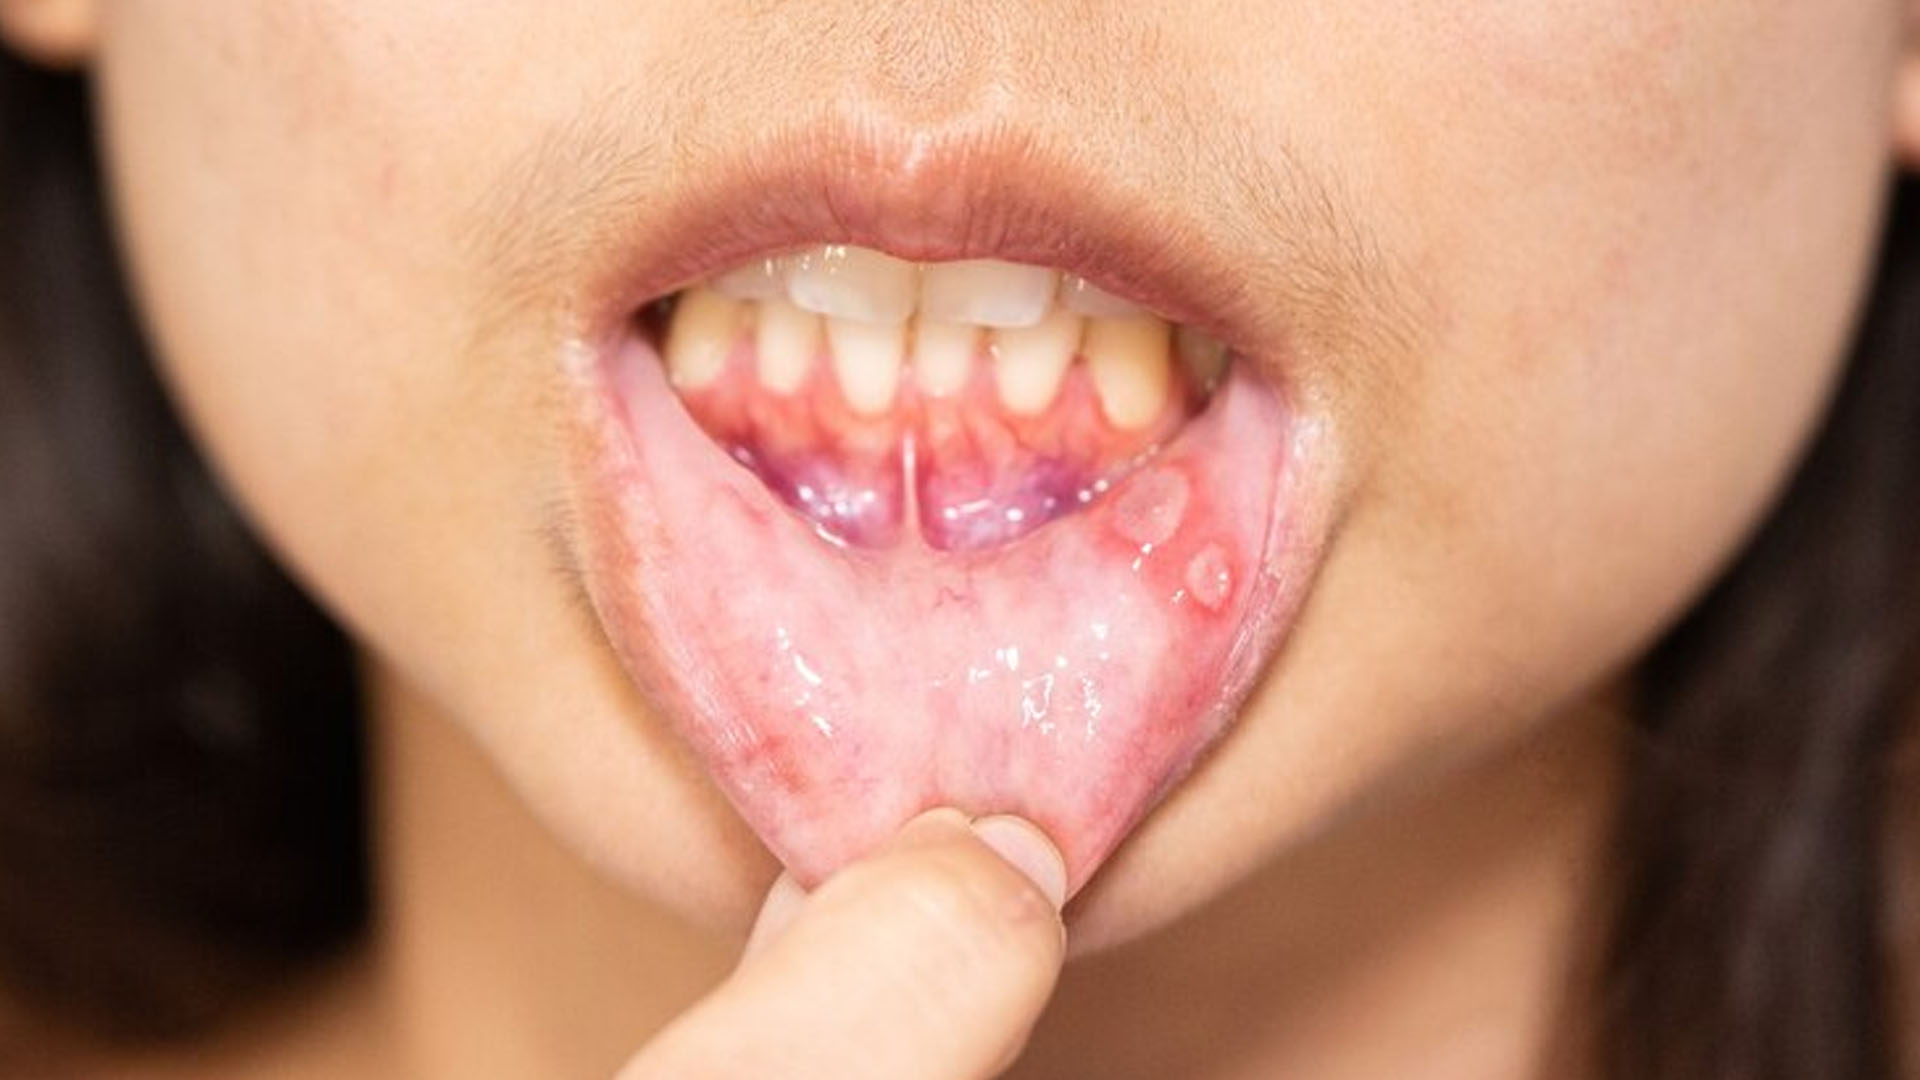 What are the Home Remedies for Mouth Fibrosis?